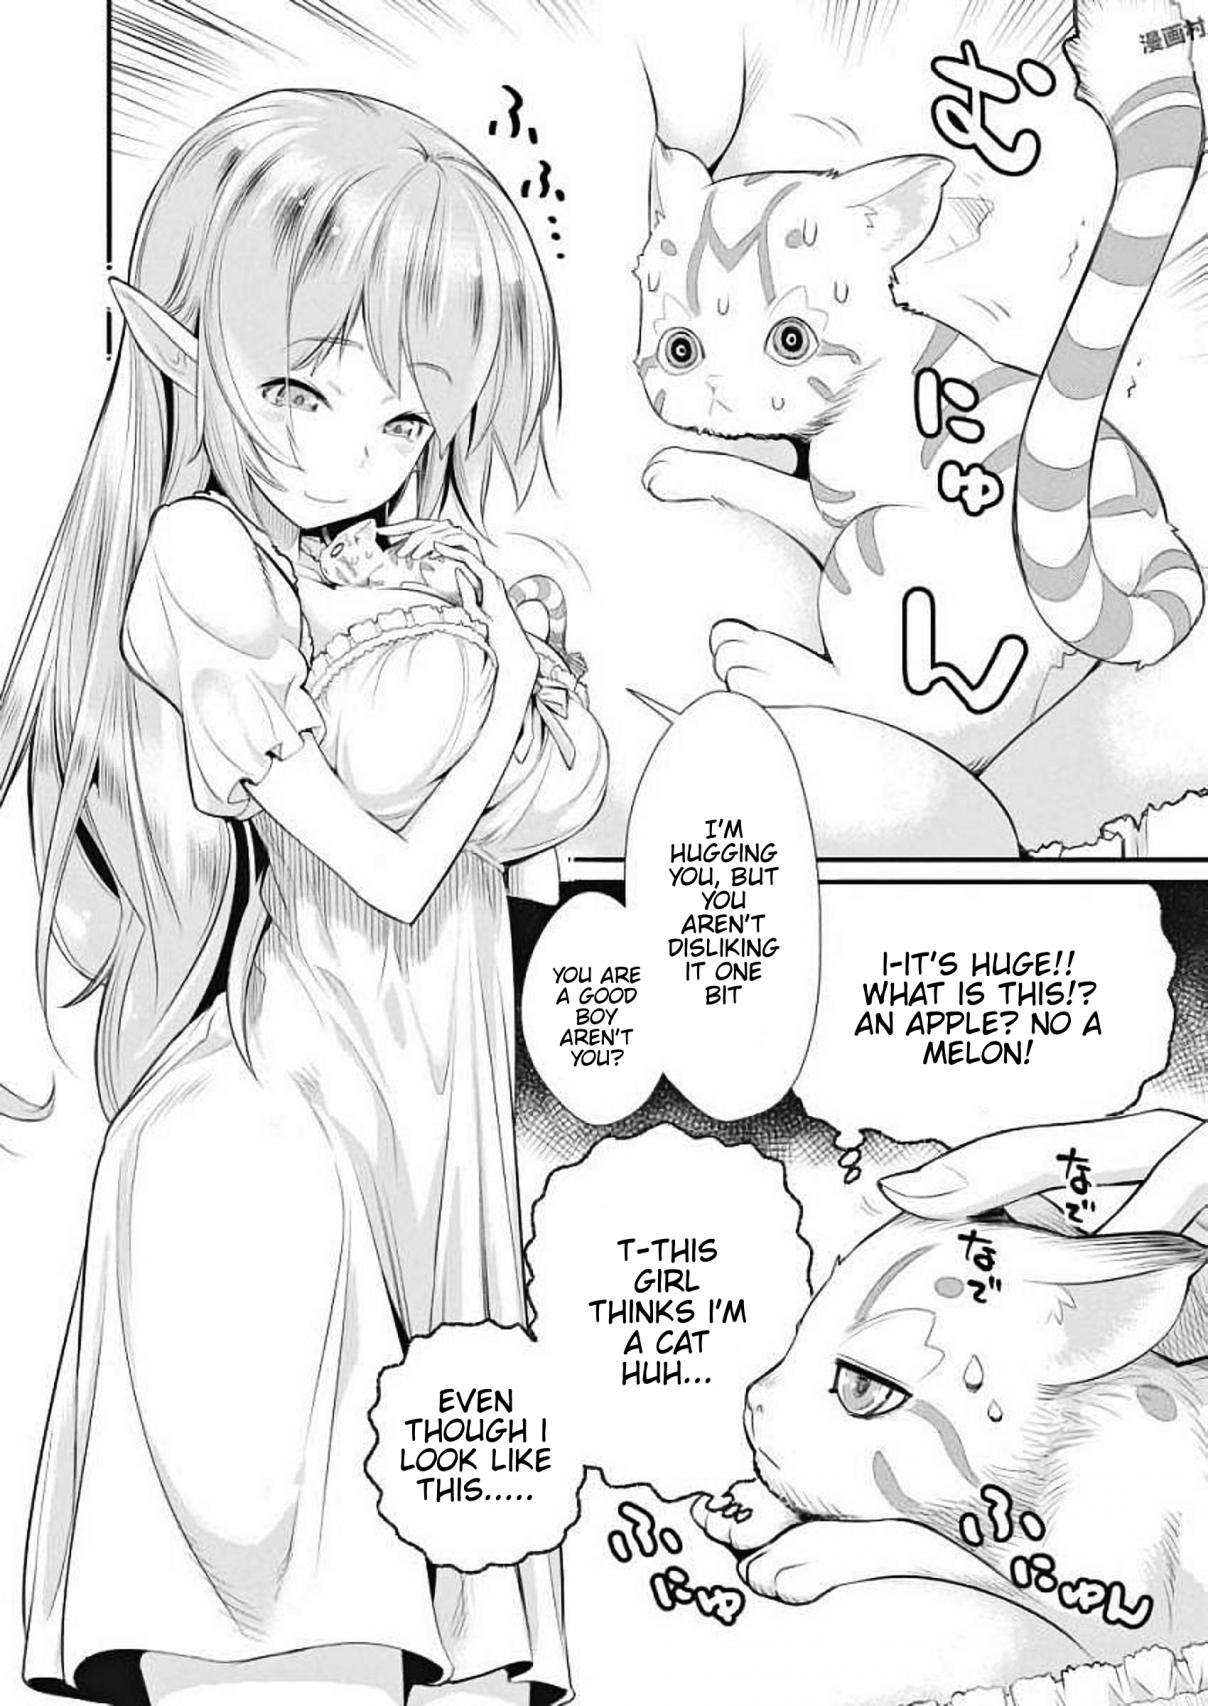 I Am Behemoth Of The S Rank Monster But I Am Mistaken As A Cat And I Live As A Pet Of Elf Girl Vol. 1 Ch. 1 A Knight's vow